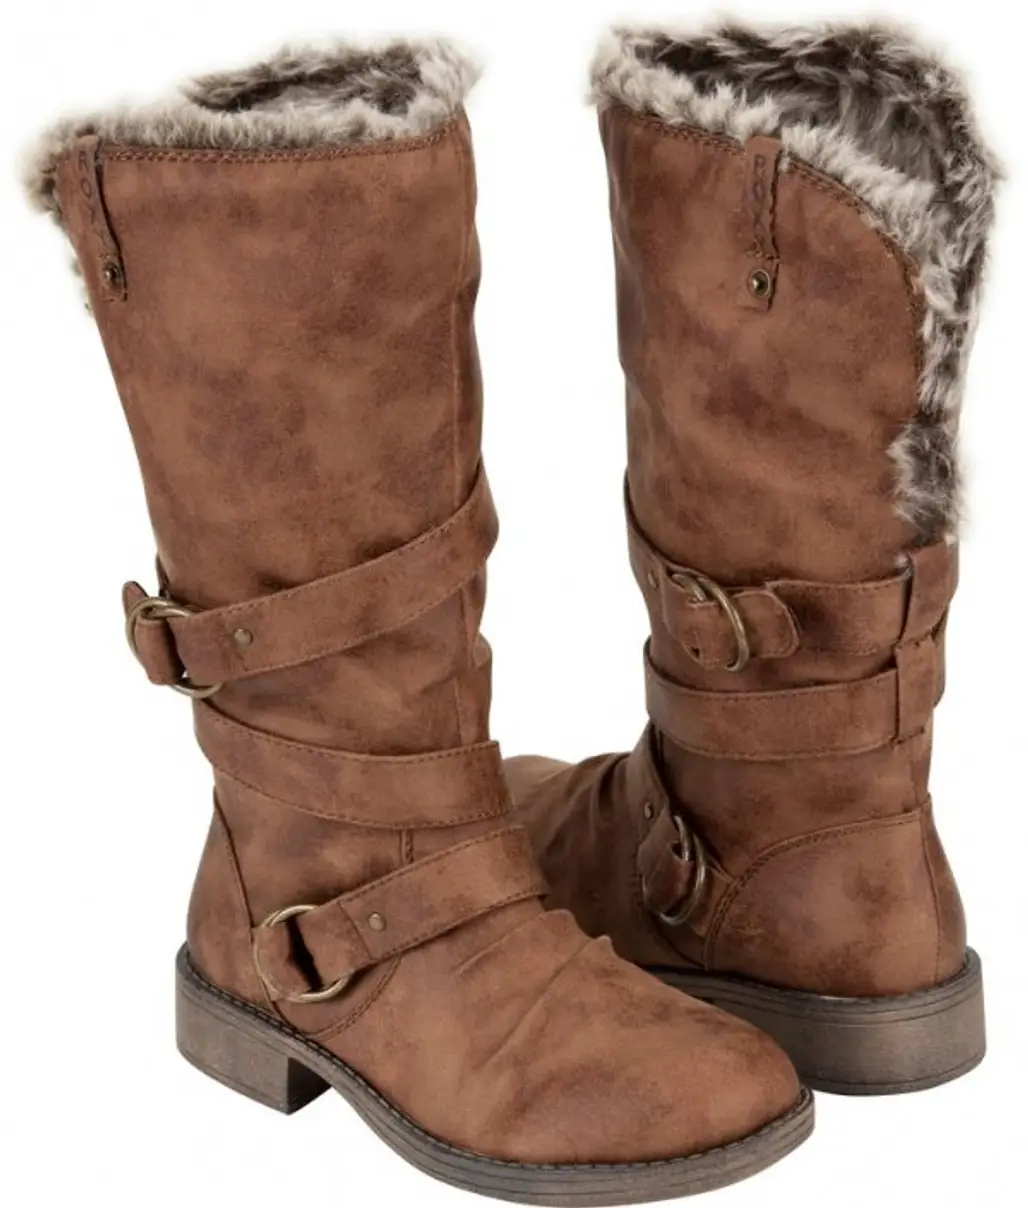 footwear,boot,brown,snow boot,leather,